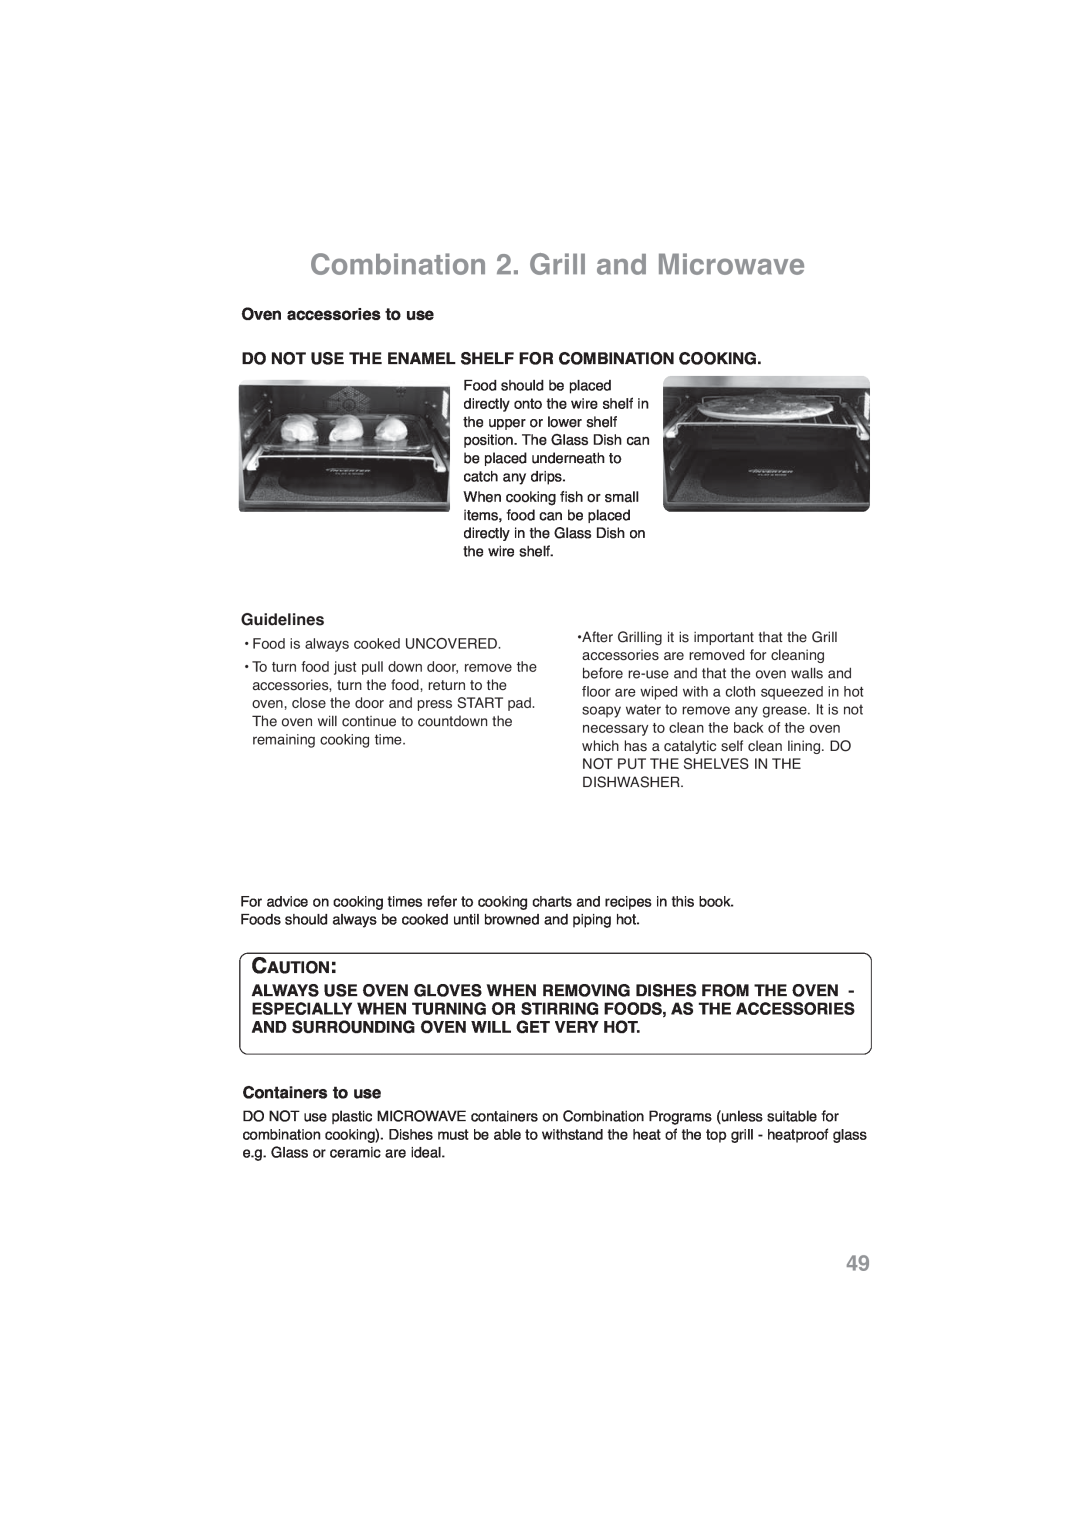 Panasonic NN-CF778S, NN-CF768M Combination 2. Grill and Microwave, Oven accessories to use, Guidelines, Containers to use 